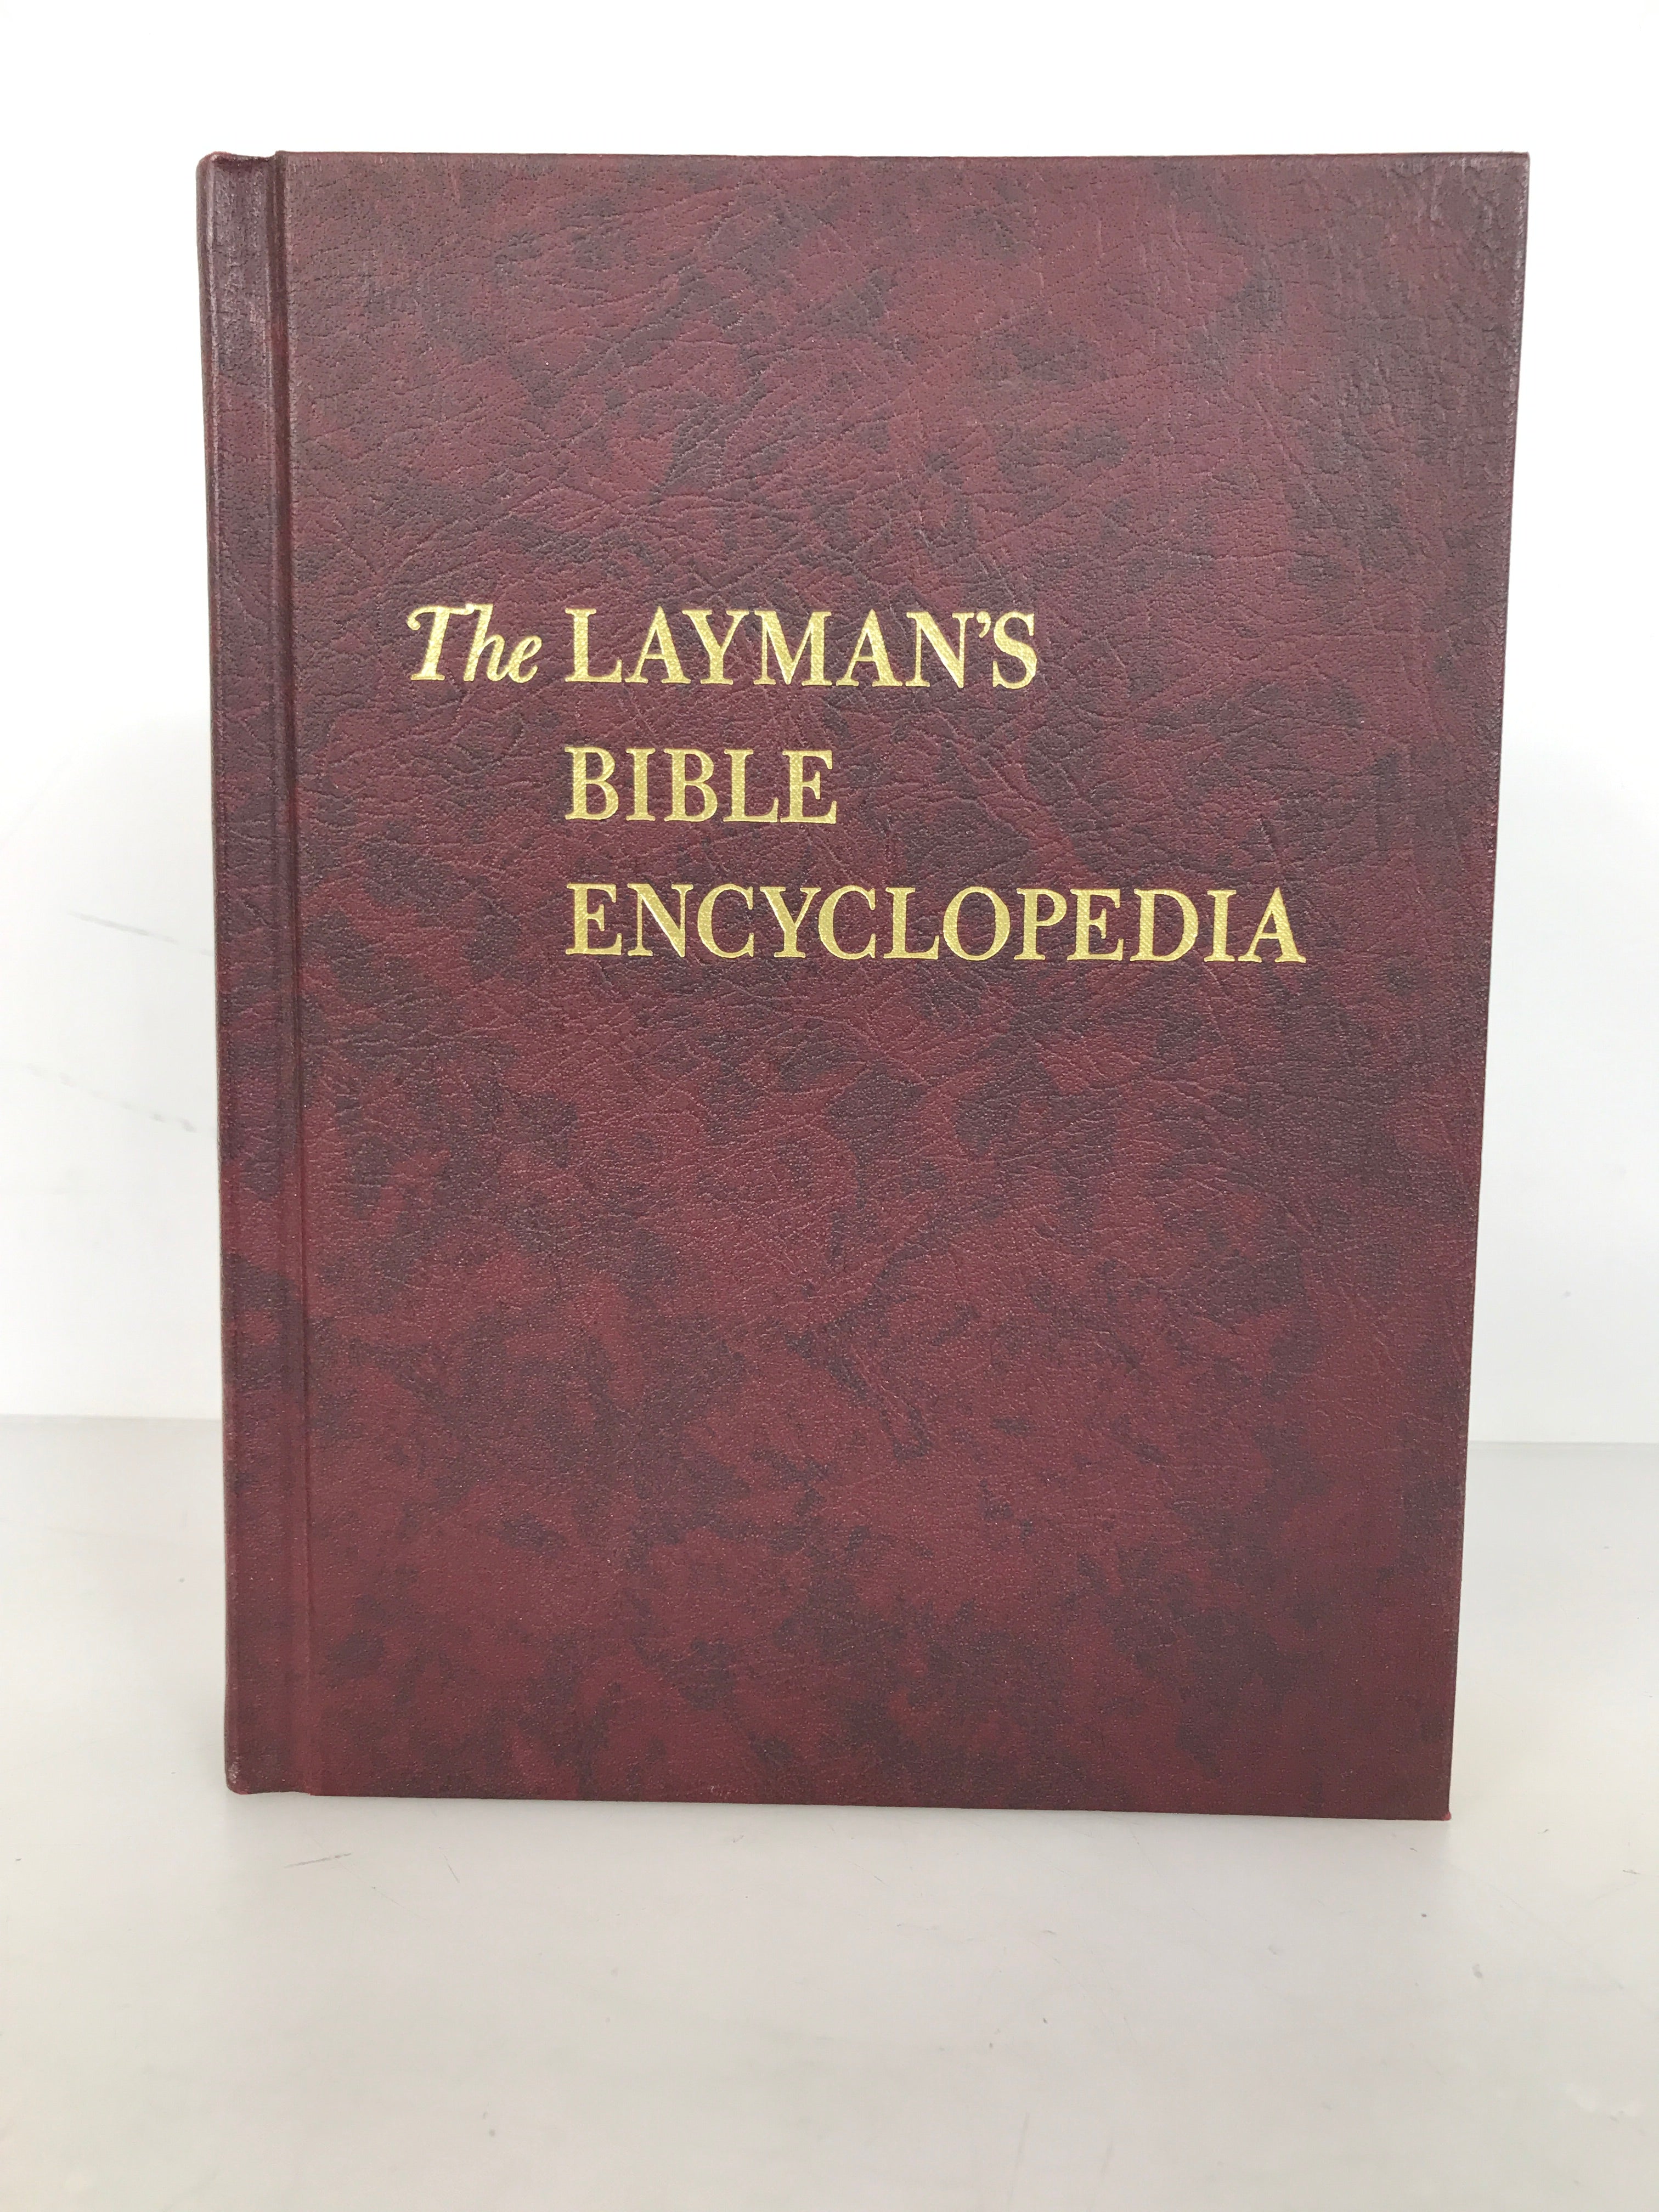 Bible Encyclopedia by William C. Martin 1964 HC By The Layman's